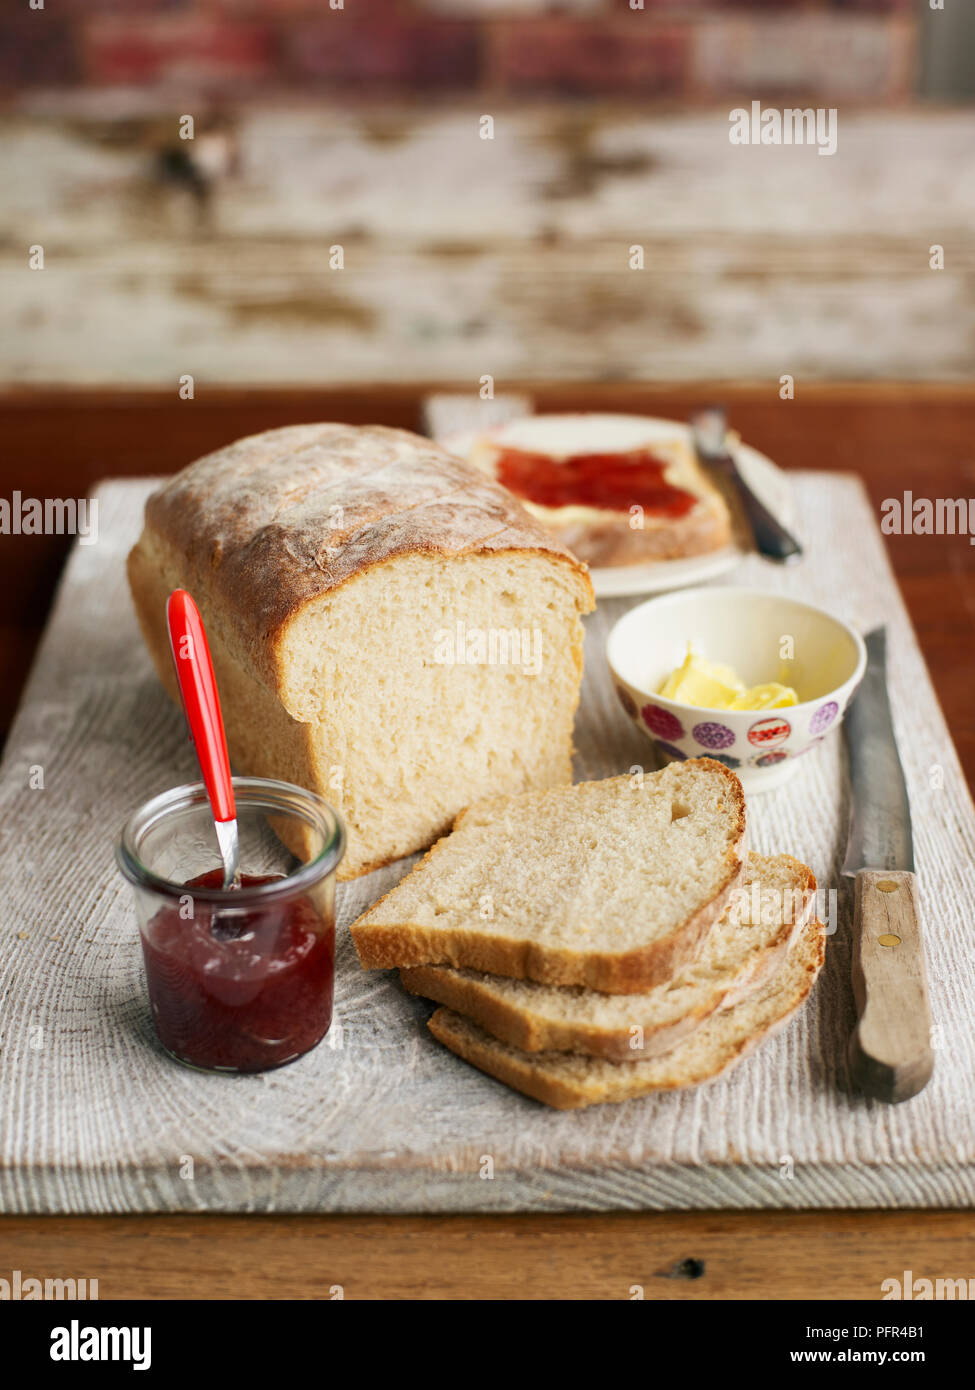 Sliced loaf of bread on wooden board with jam and butter Stock Photo